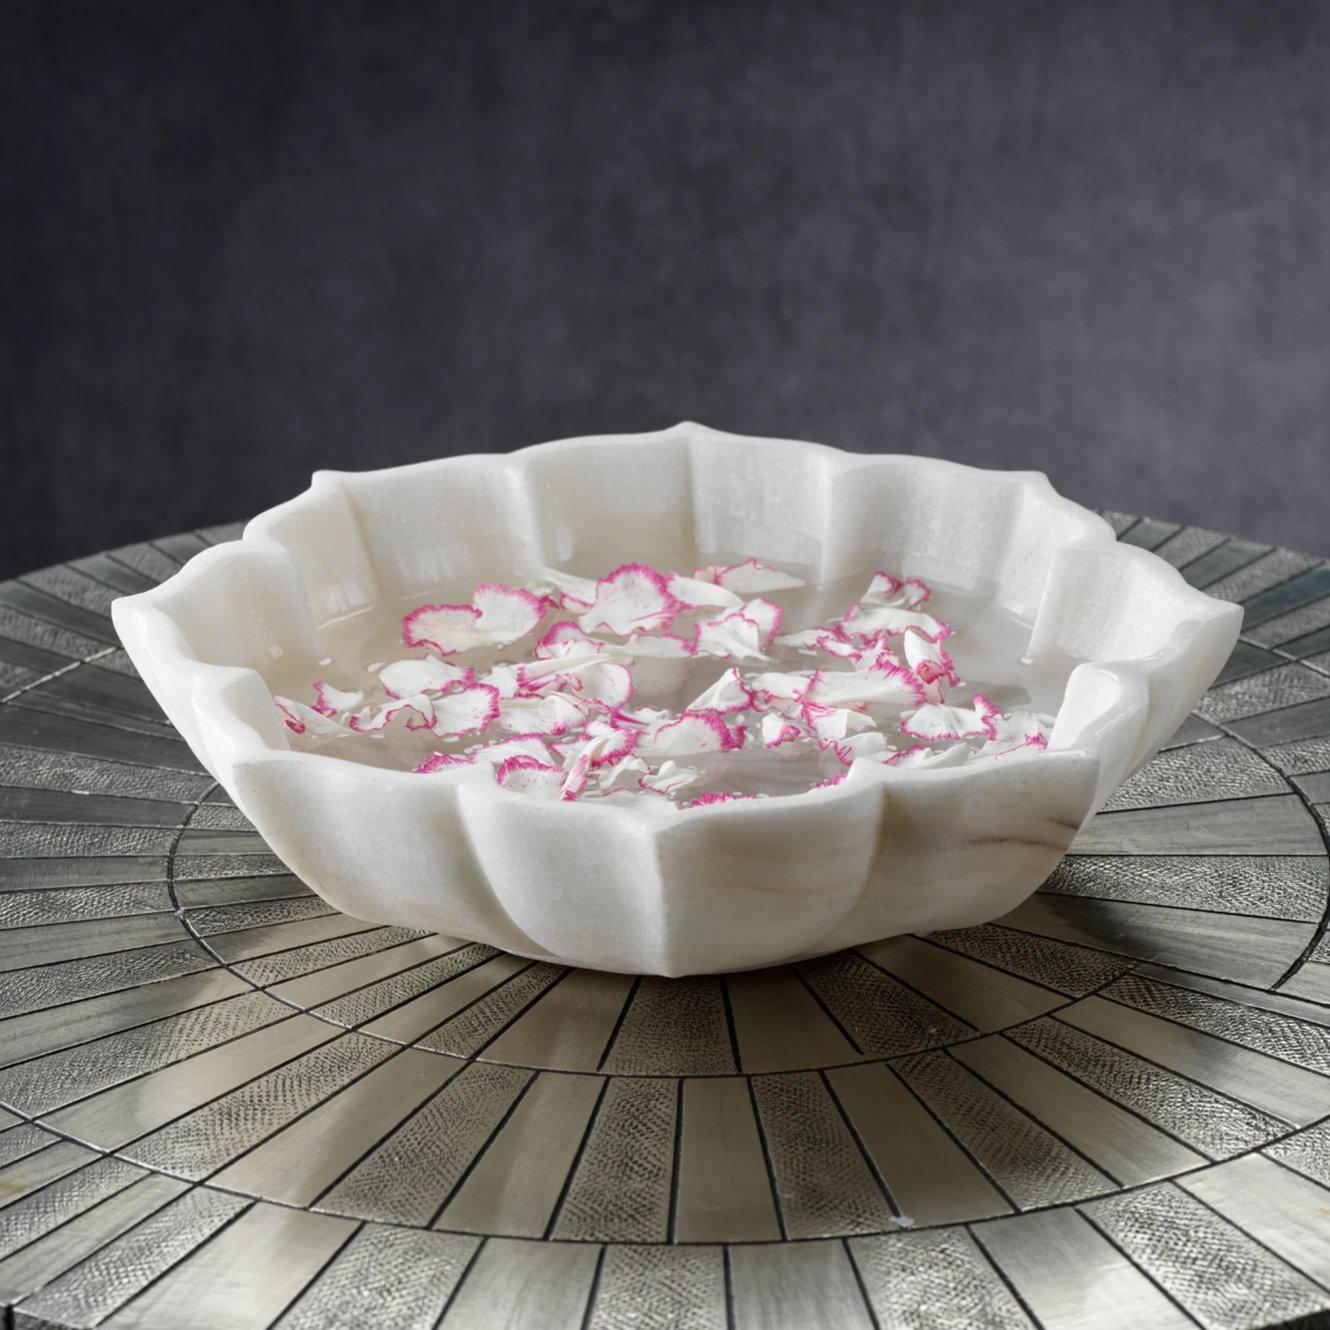 Lotus Marble Bowl - CARLYLE AVENUE